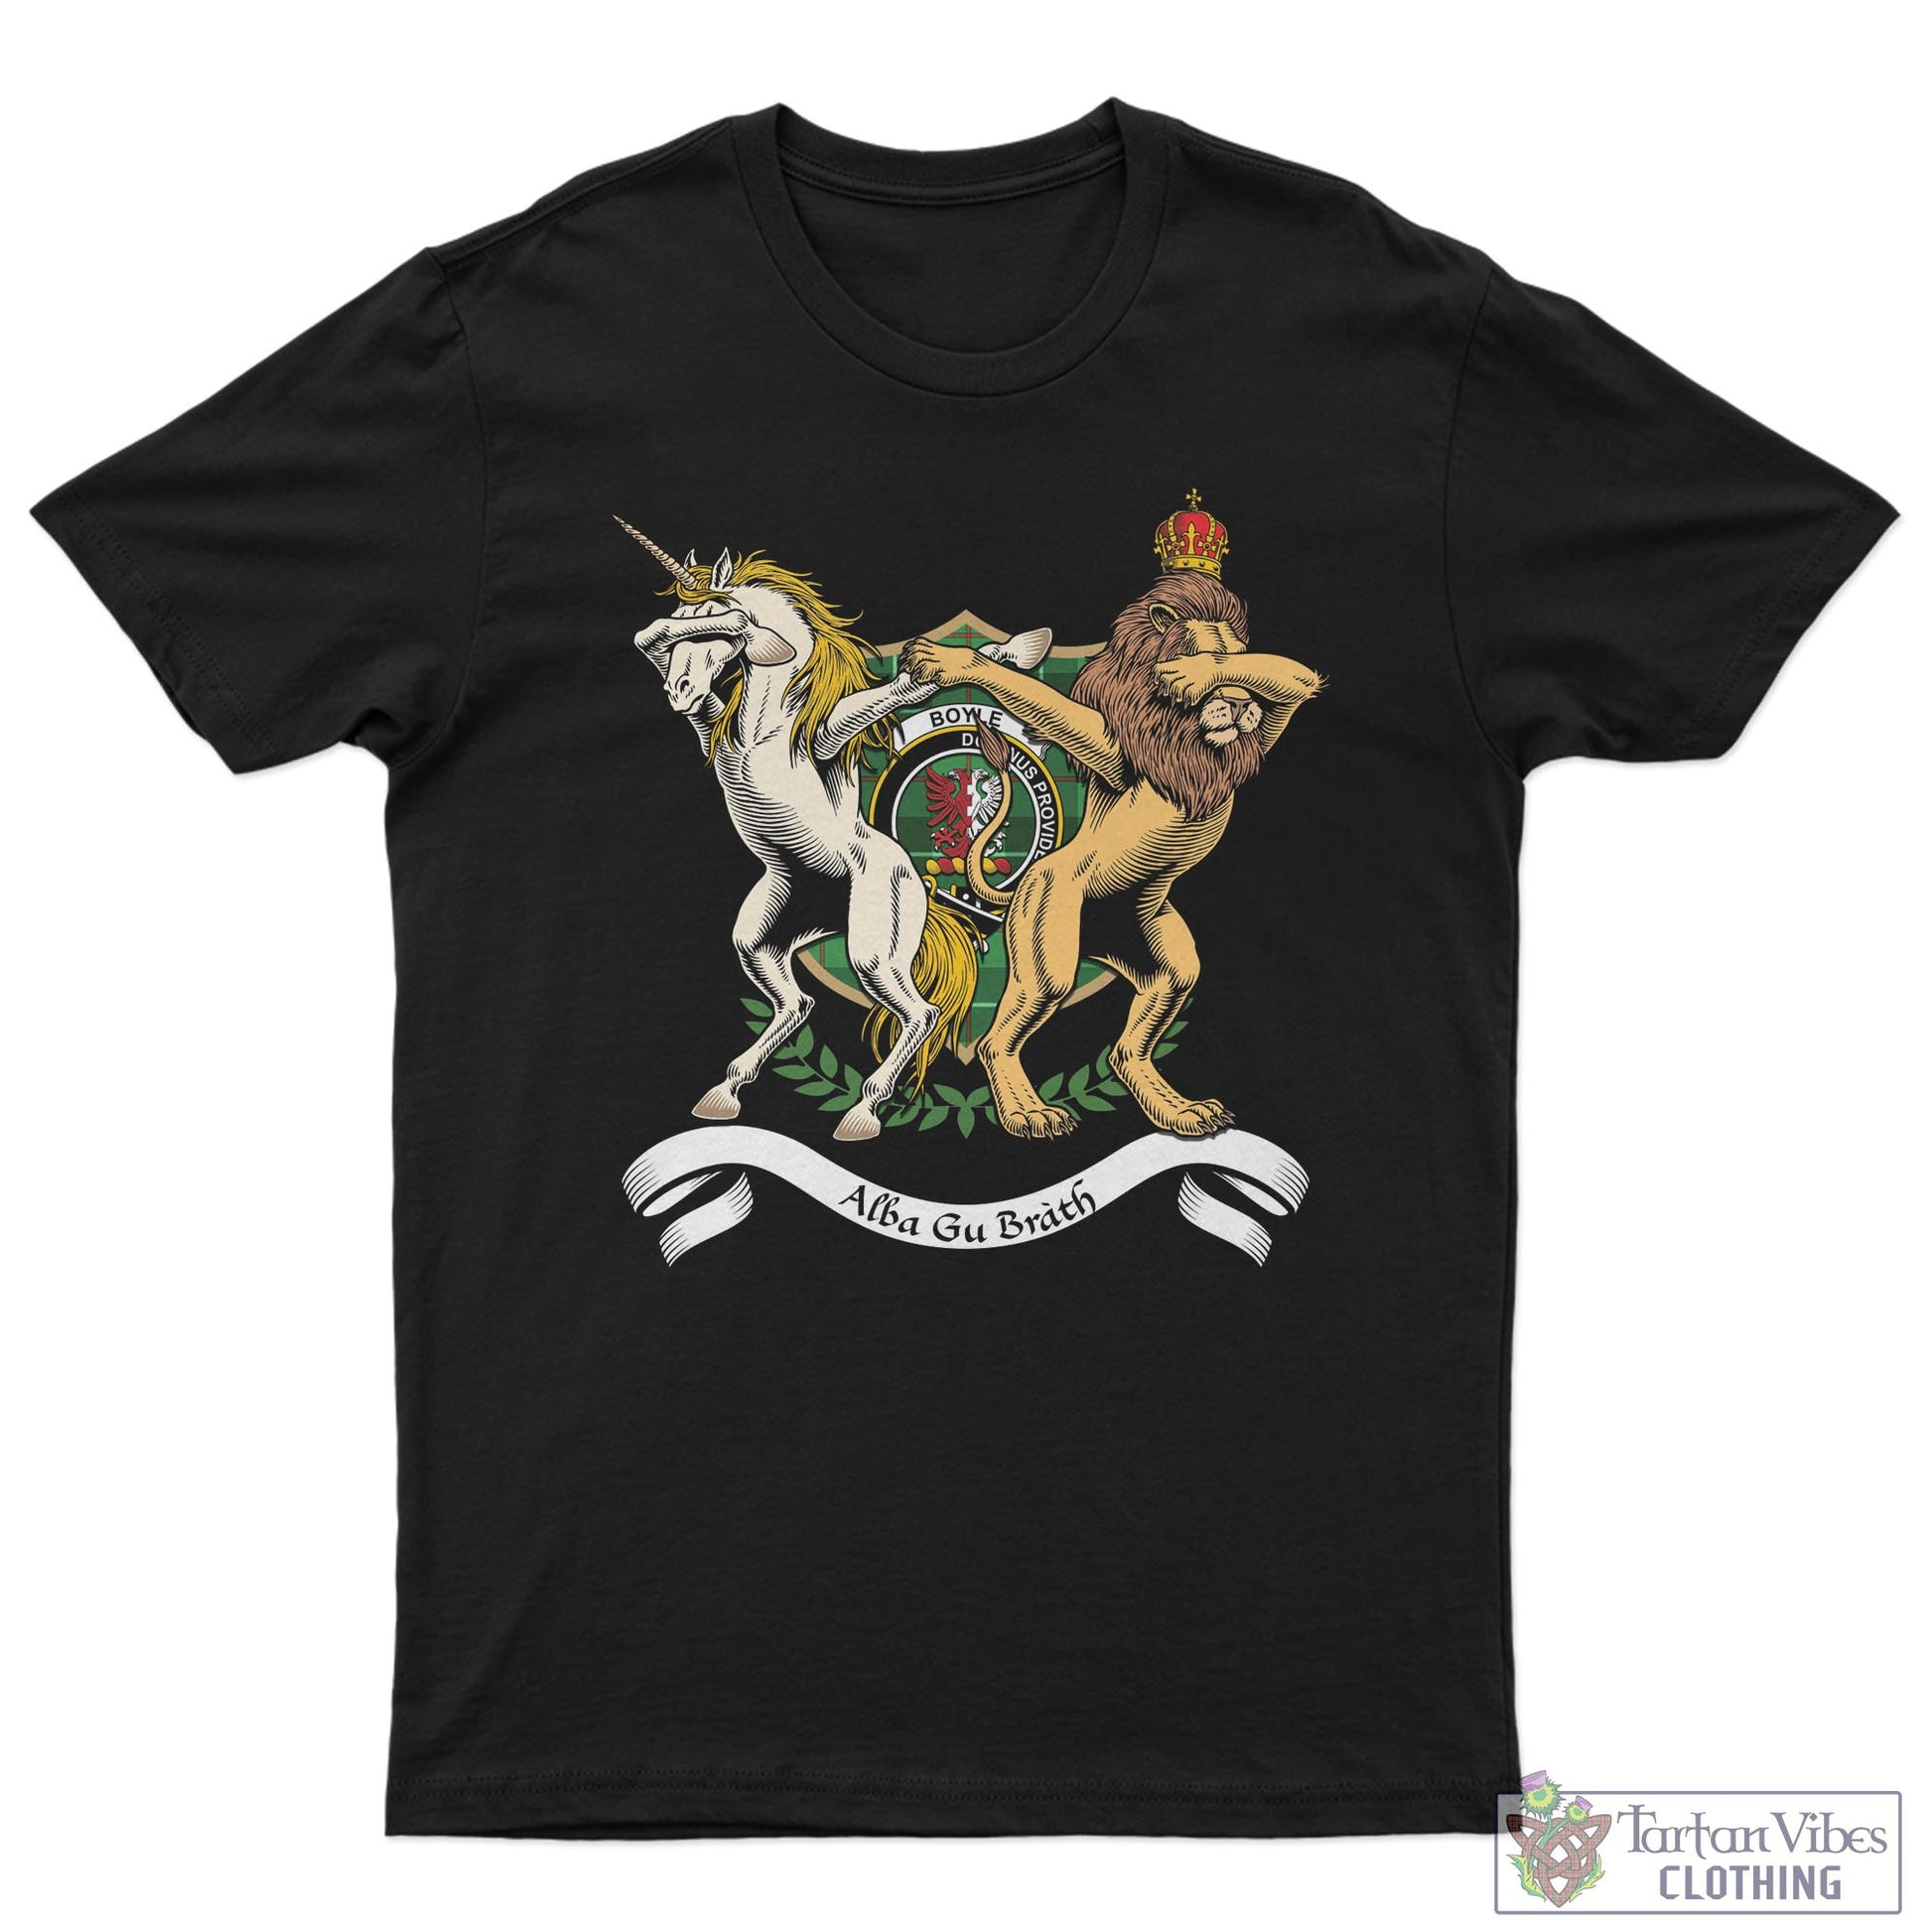 Tartan Vibes Clothing Boyle Family Crest Cotton Men's T-Shirt with Scotland Royal Coat Of Arm Funny Style